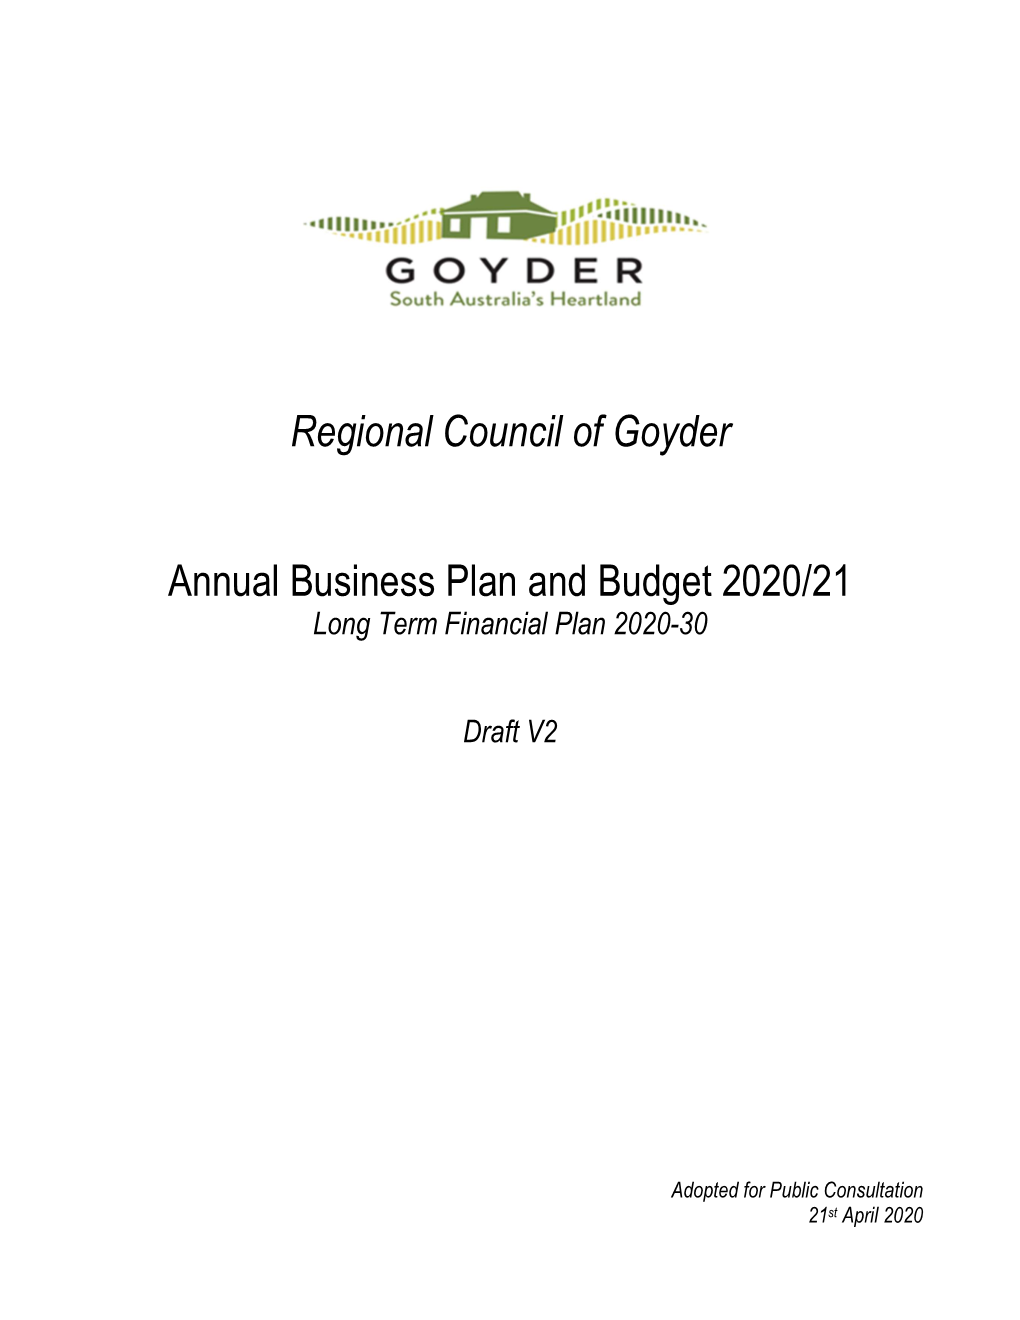 Regional Council of Goyder Annual Business Plan and Budget 2020/21